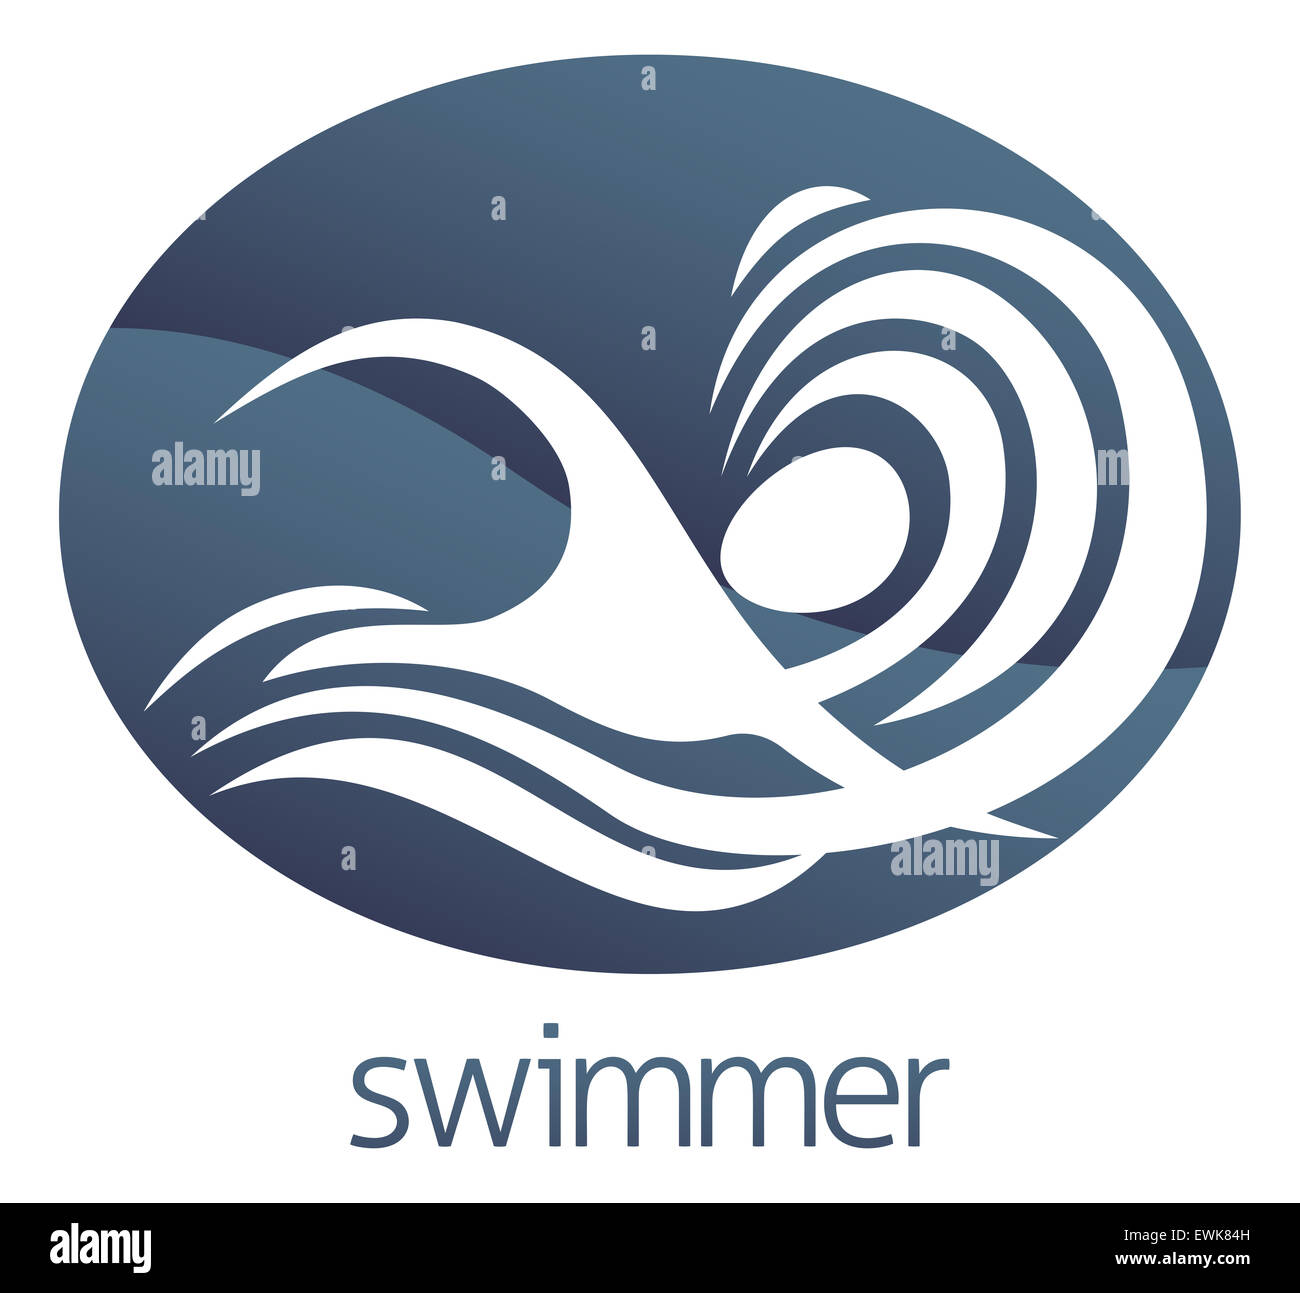 An illustration of an abstract swimmer swimming through waves circle concept design Stock Photo